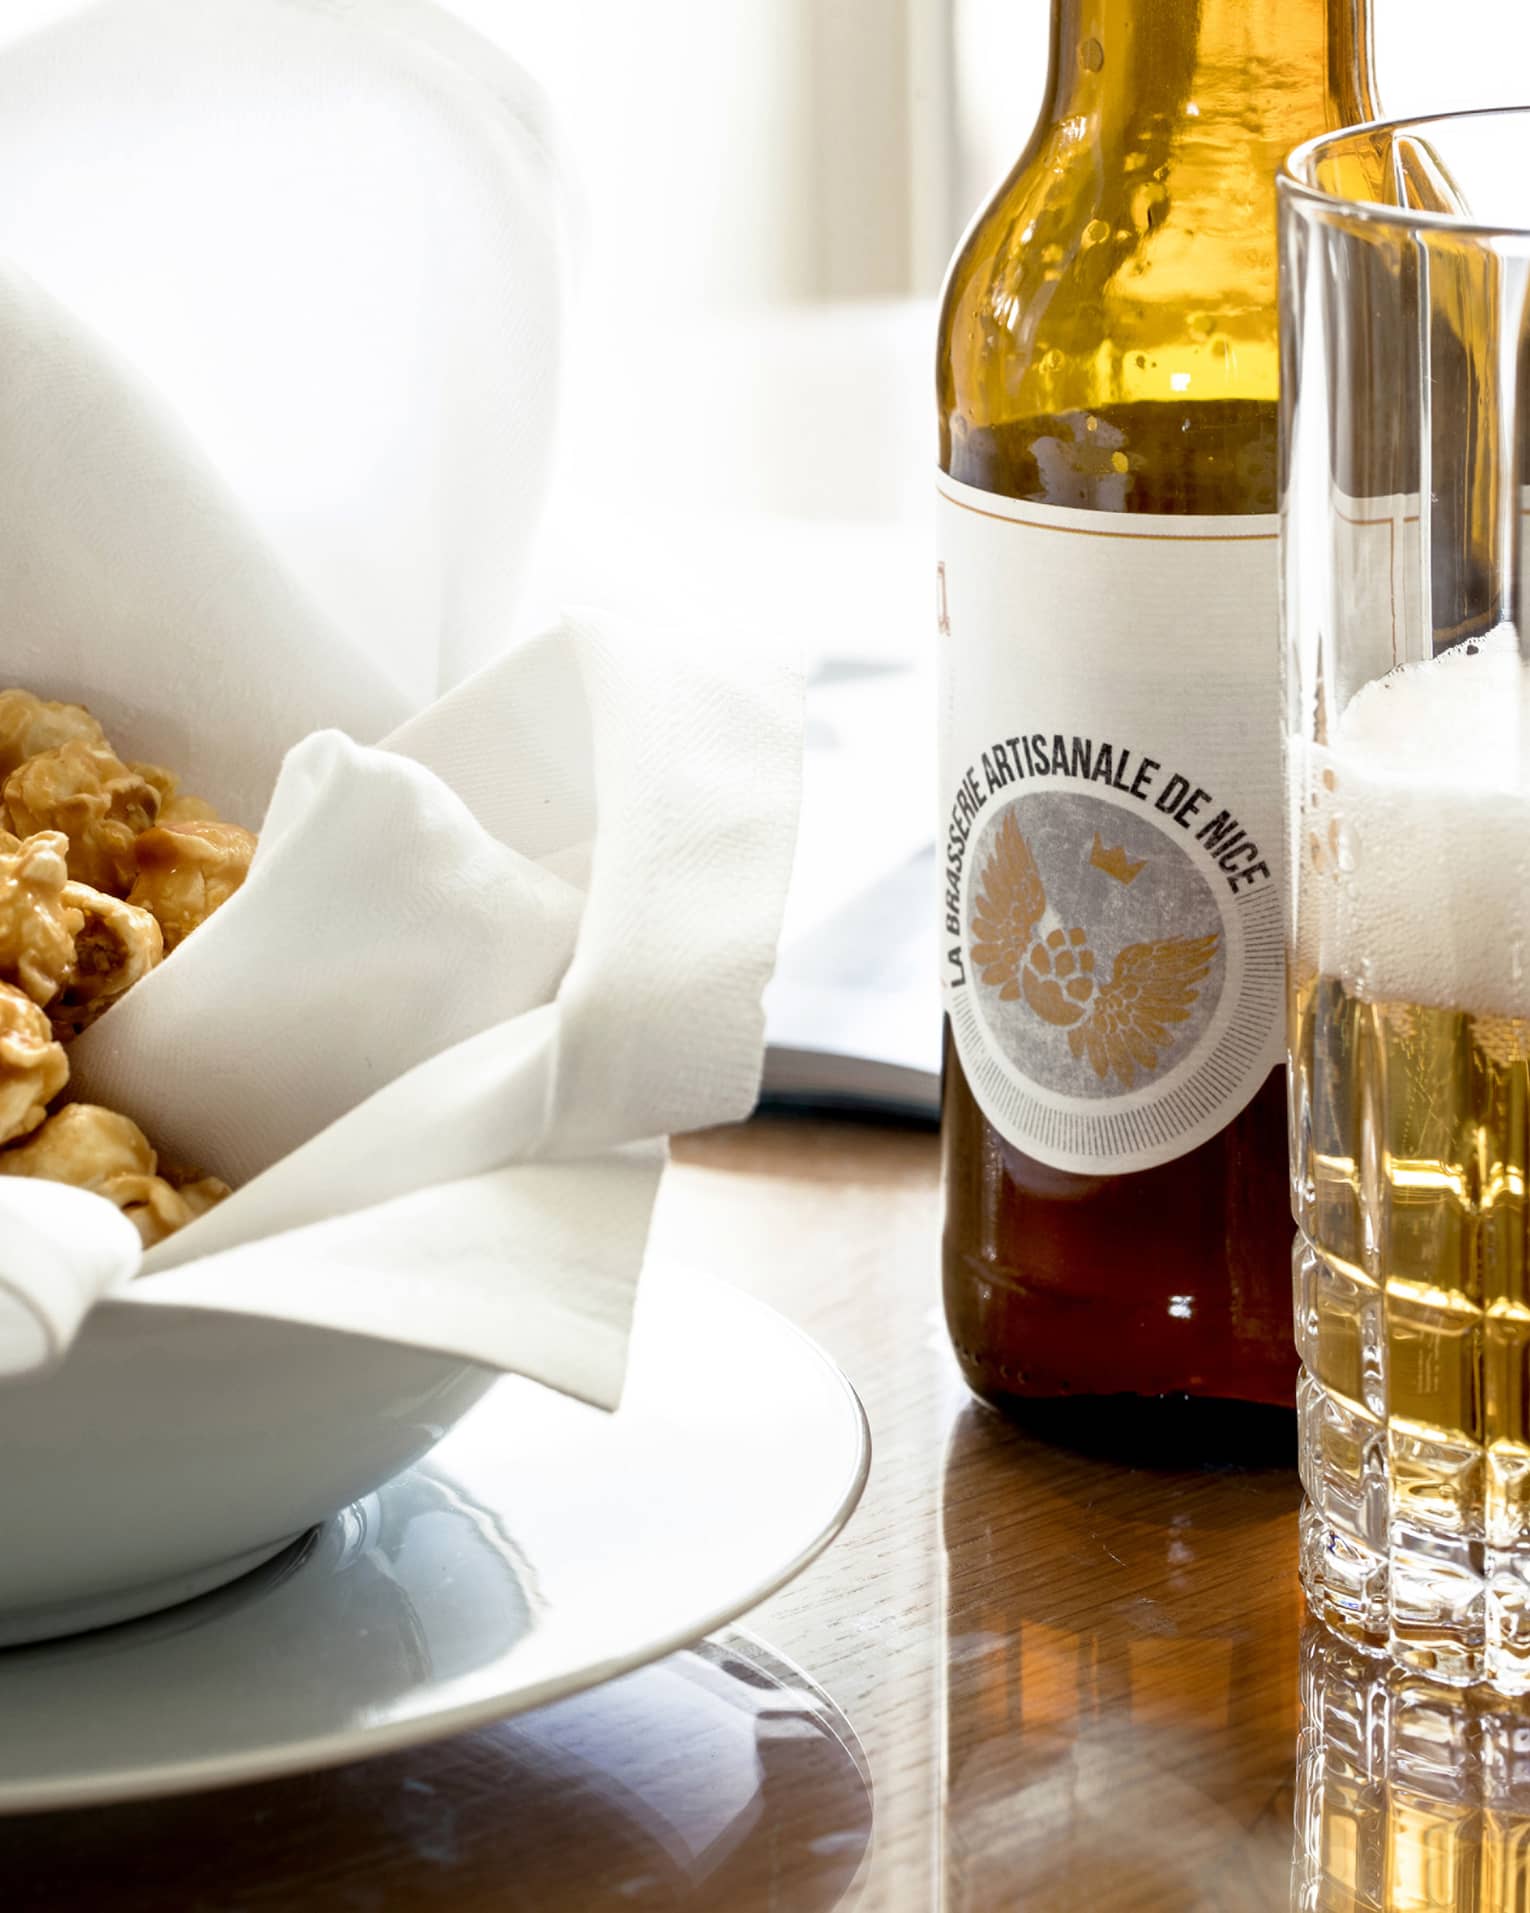 An amber bottle of artisanal beer beside a partially filled, foamy glass and a bowl of caramel popcorn on a cloth napkin. 